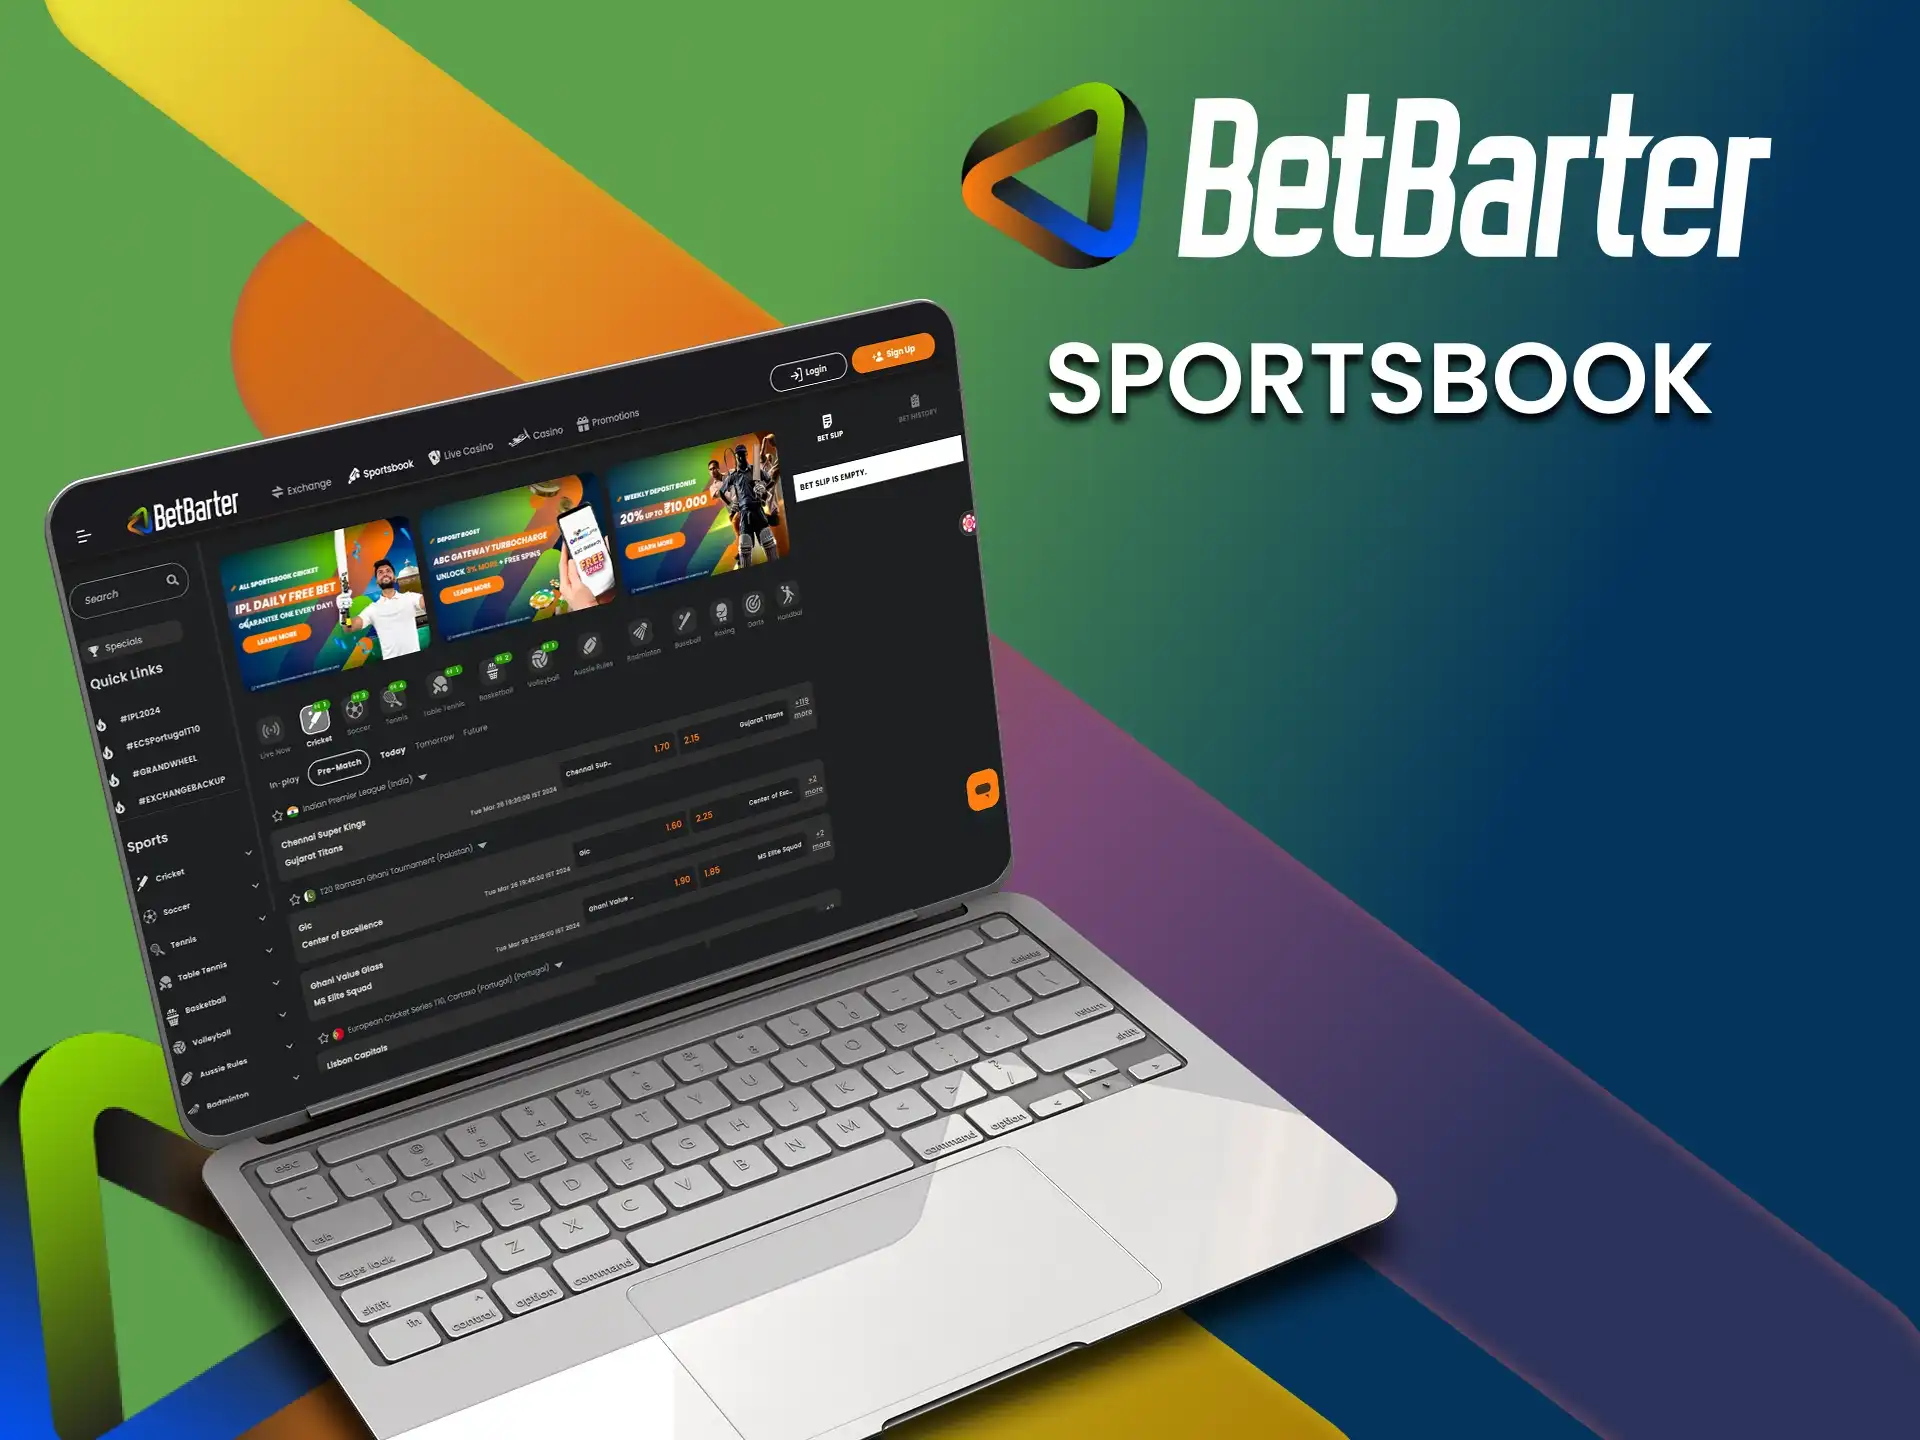 The main disciplines in this section of BetBarter sportsbook are football and cricket which are very popular in India.